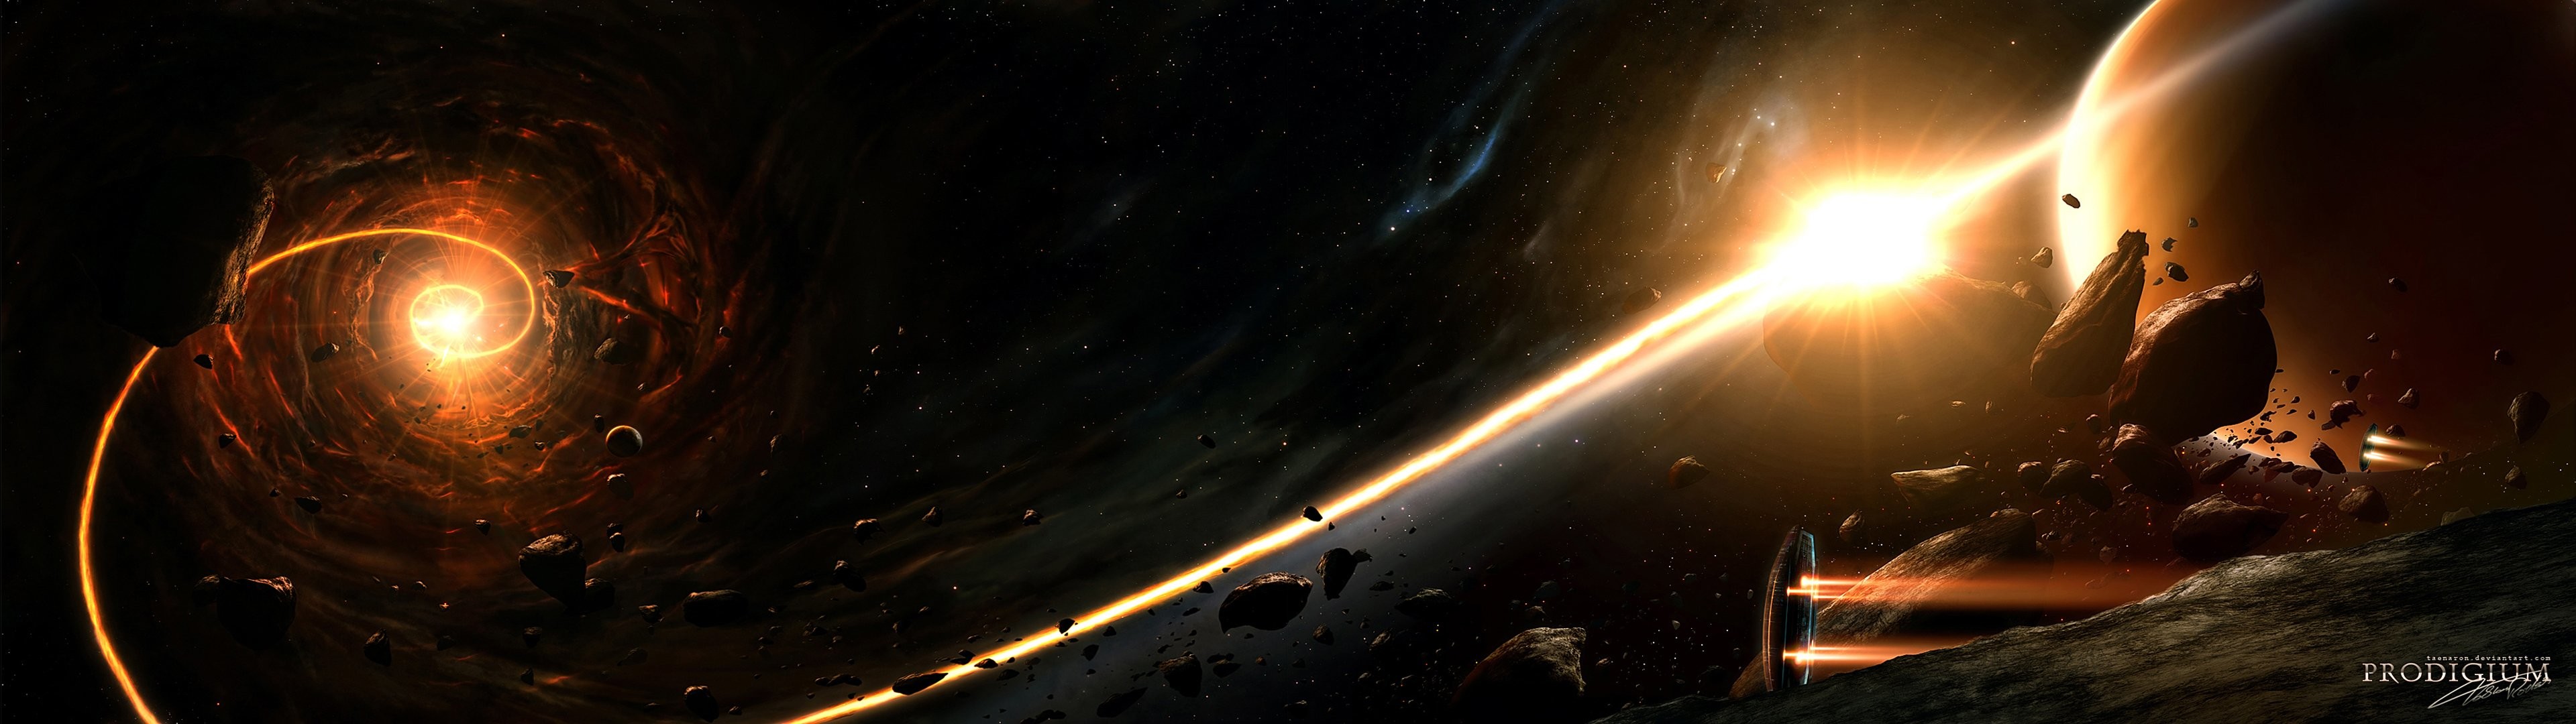 3840x1080 outer space planets wallpaper |  | 329246 | WallpaperUP .